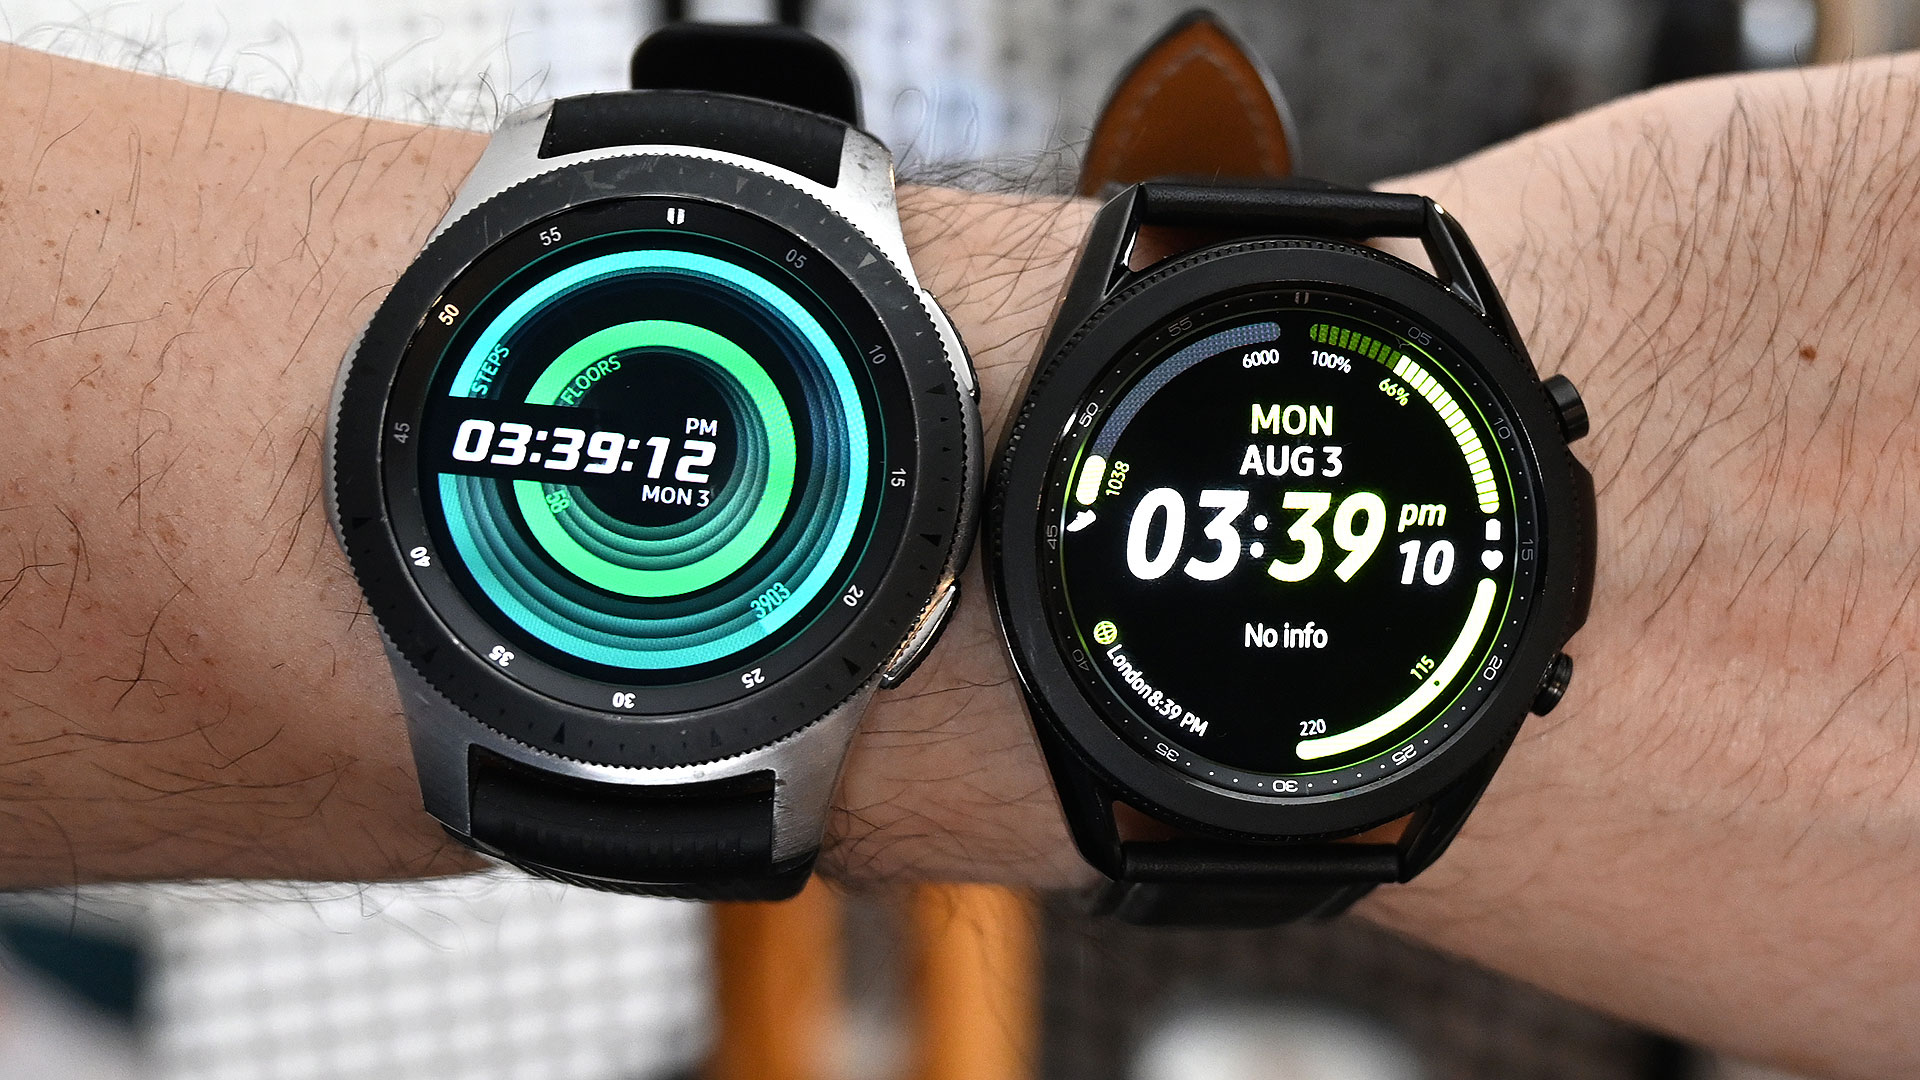 Another side-by-side between the Galaxy Watch (left) and the new Galaxy Watch 3.  (Photo: Sam Rutherford/Gizmodo)